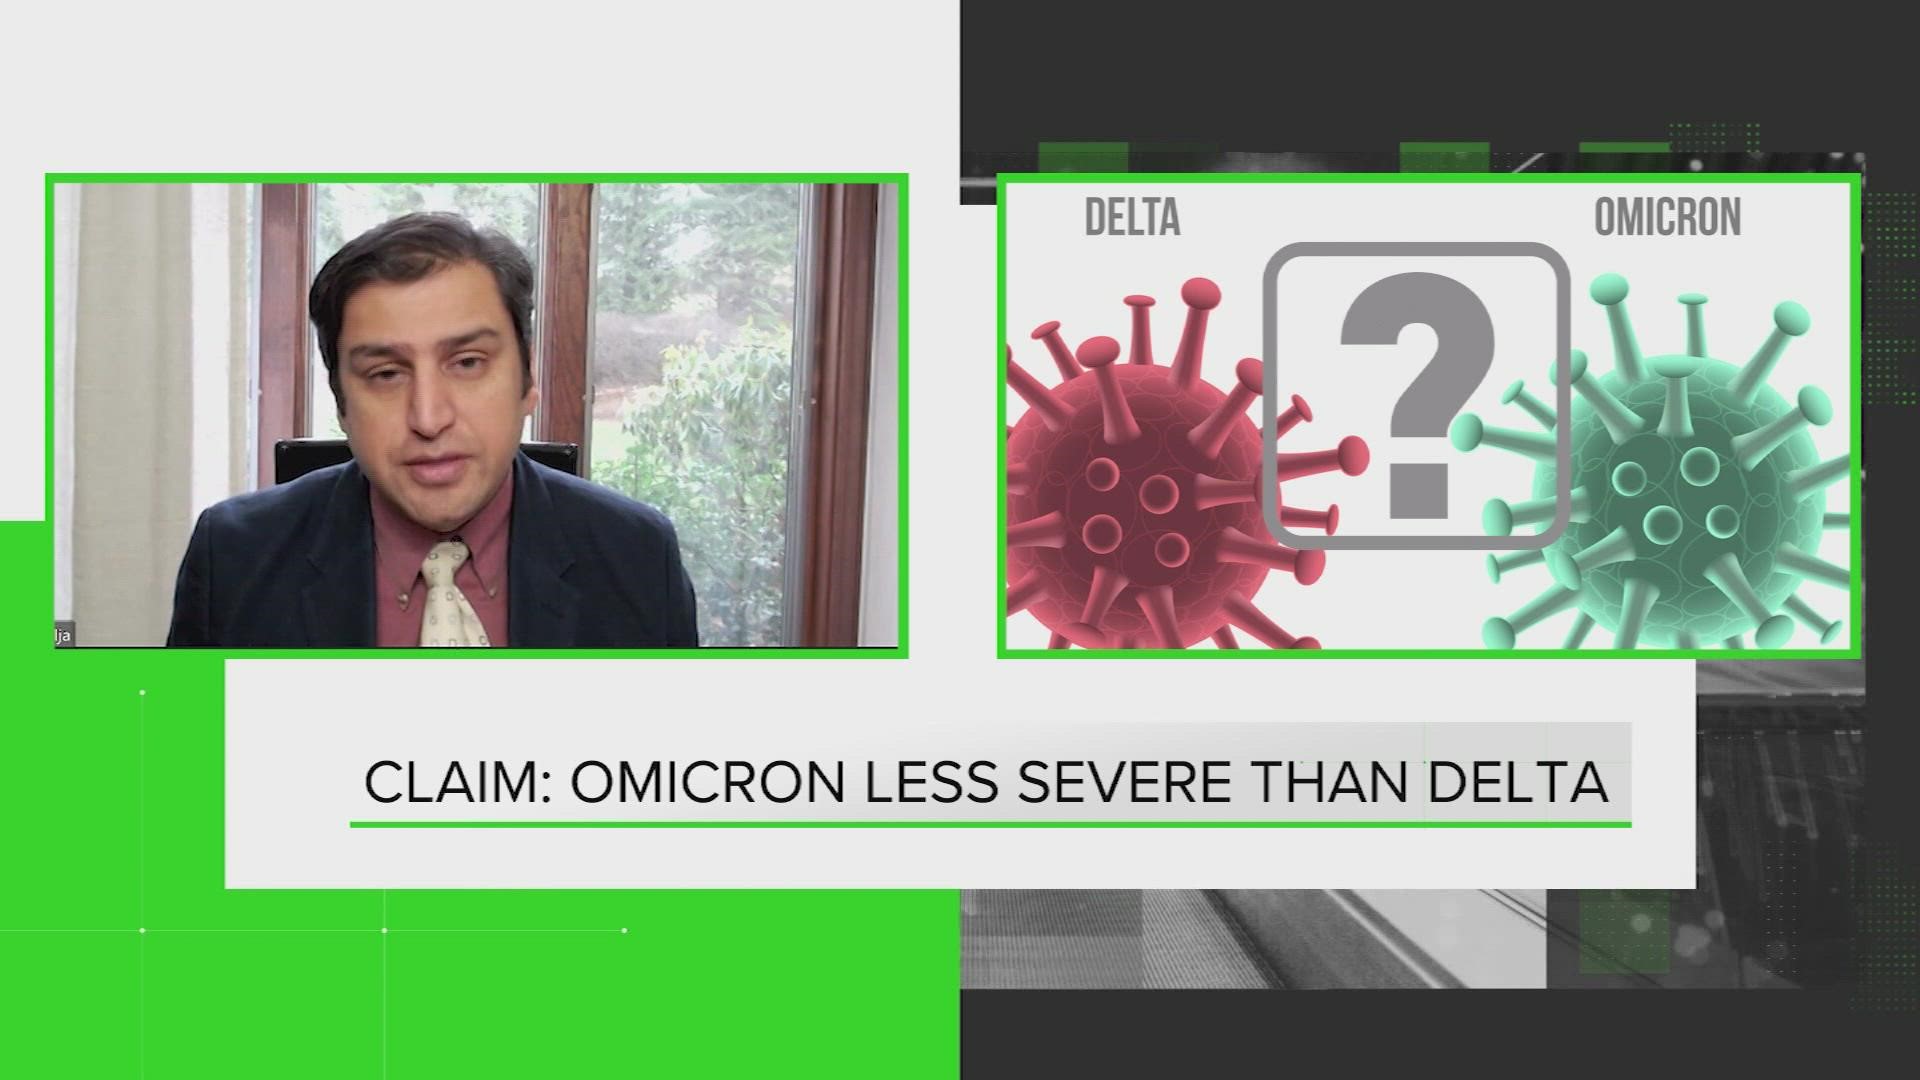 Dr. Amesh Adalja says many claims, such as whether omicron is more transmissible, are not yet known.